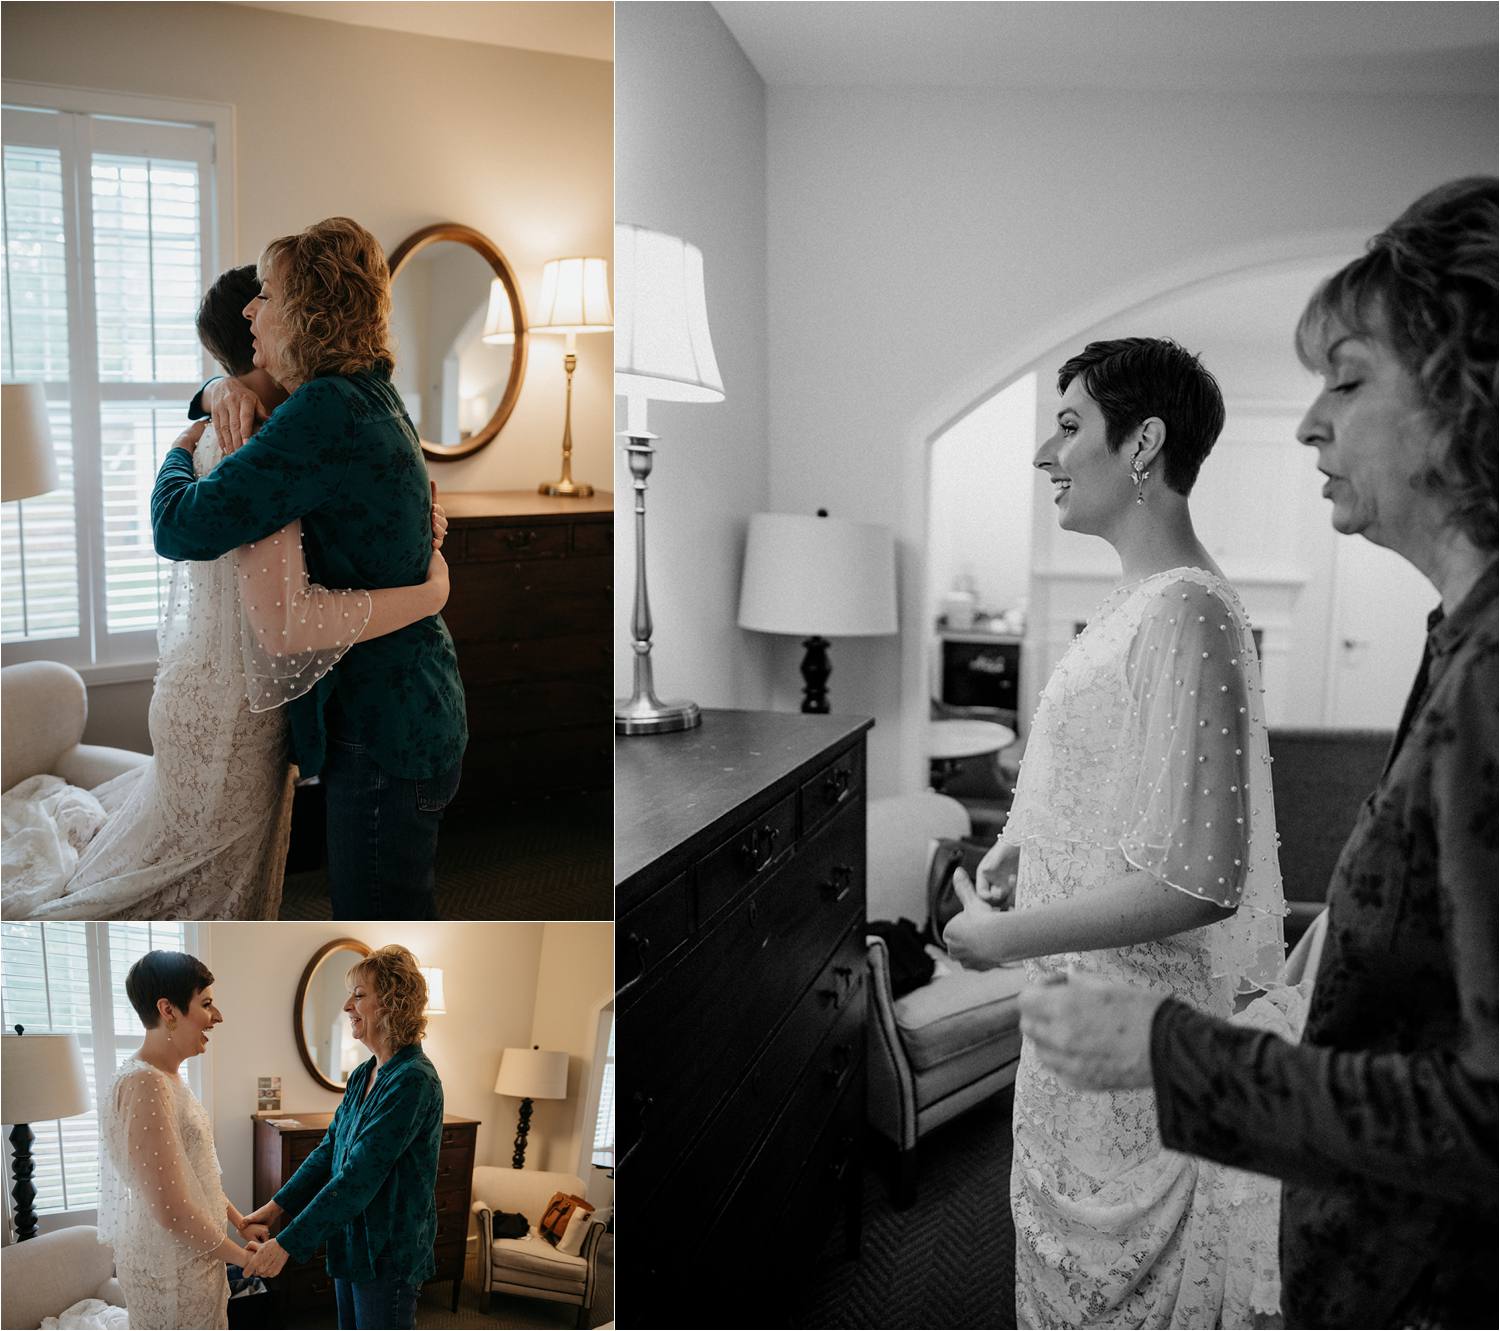 Bride sharing a moment with her mother getting ready